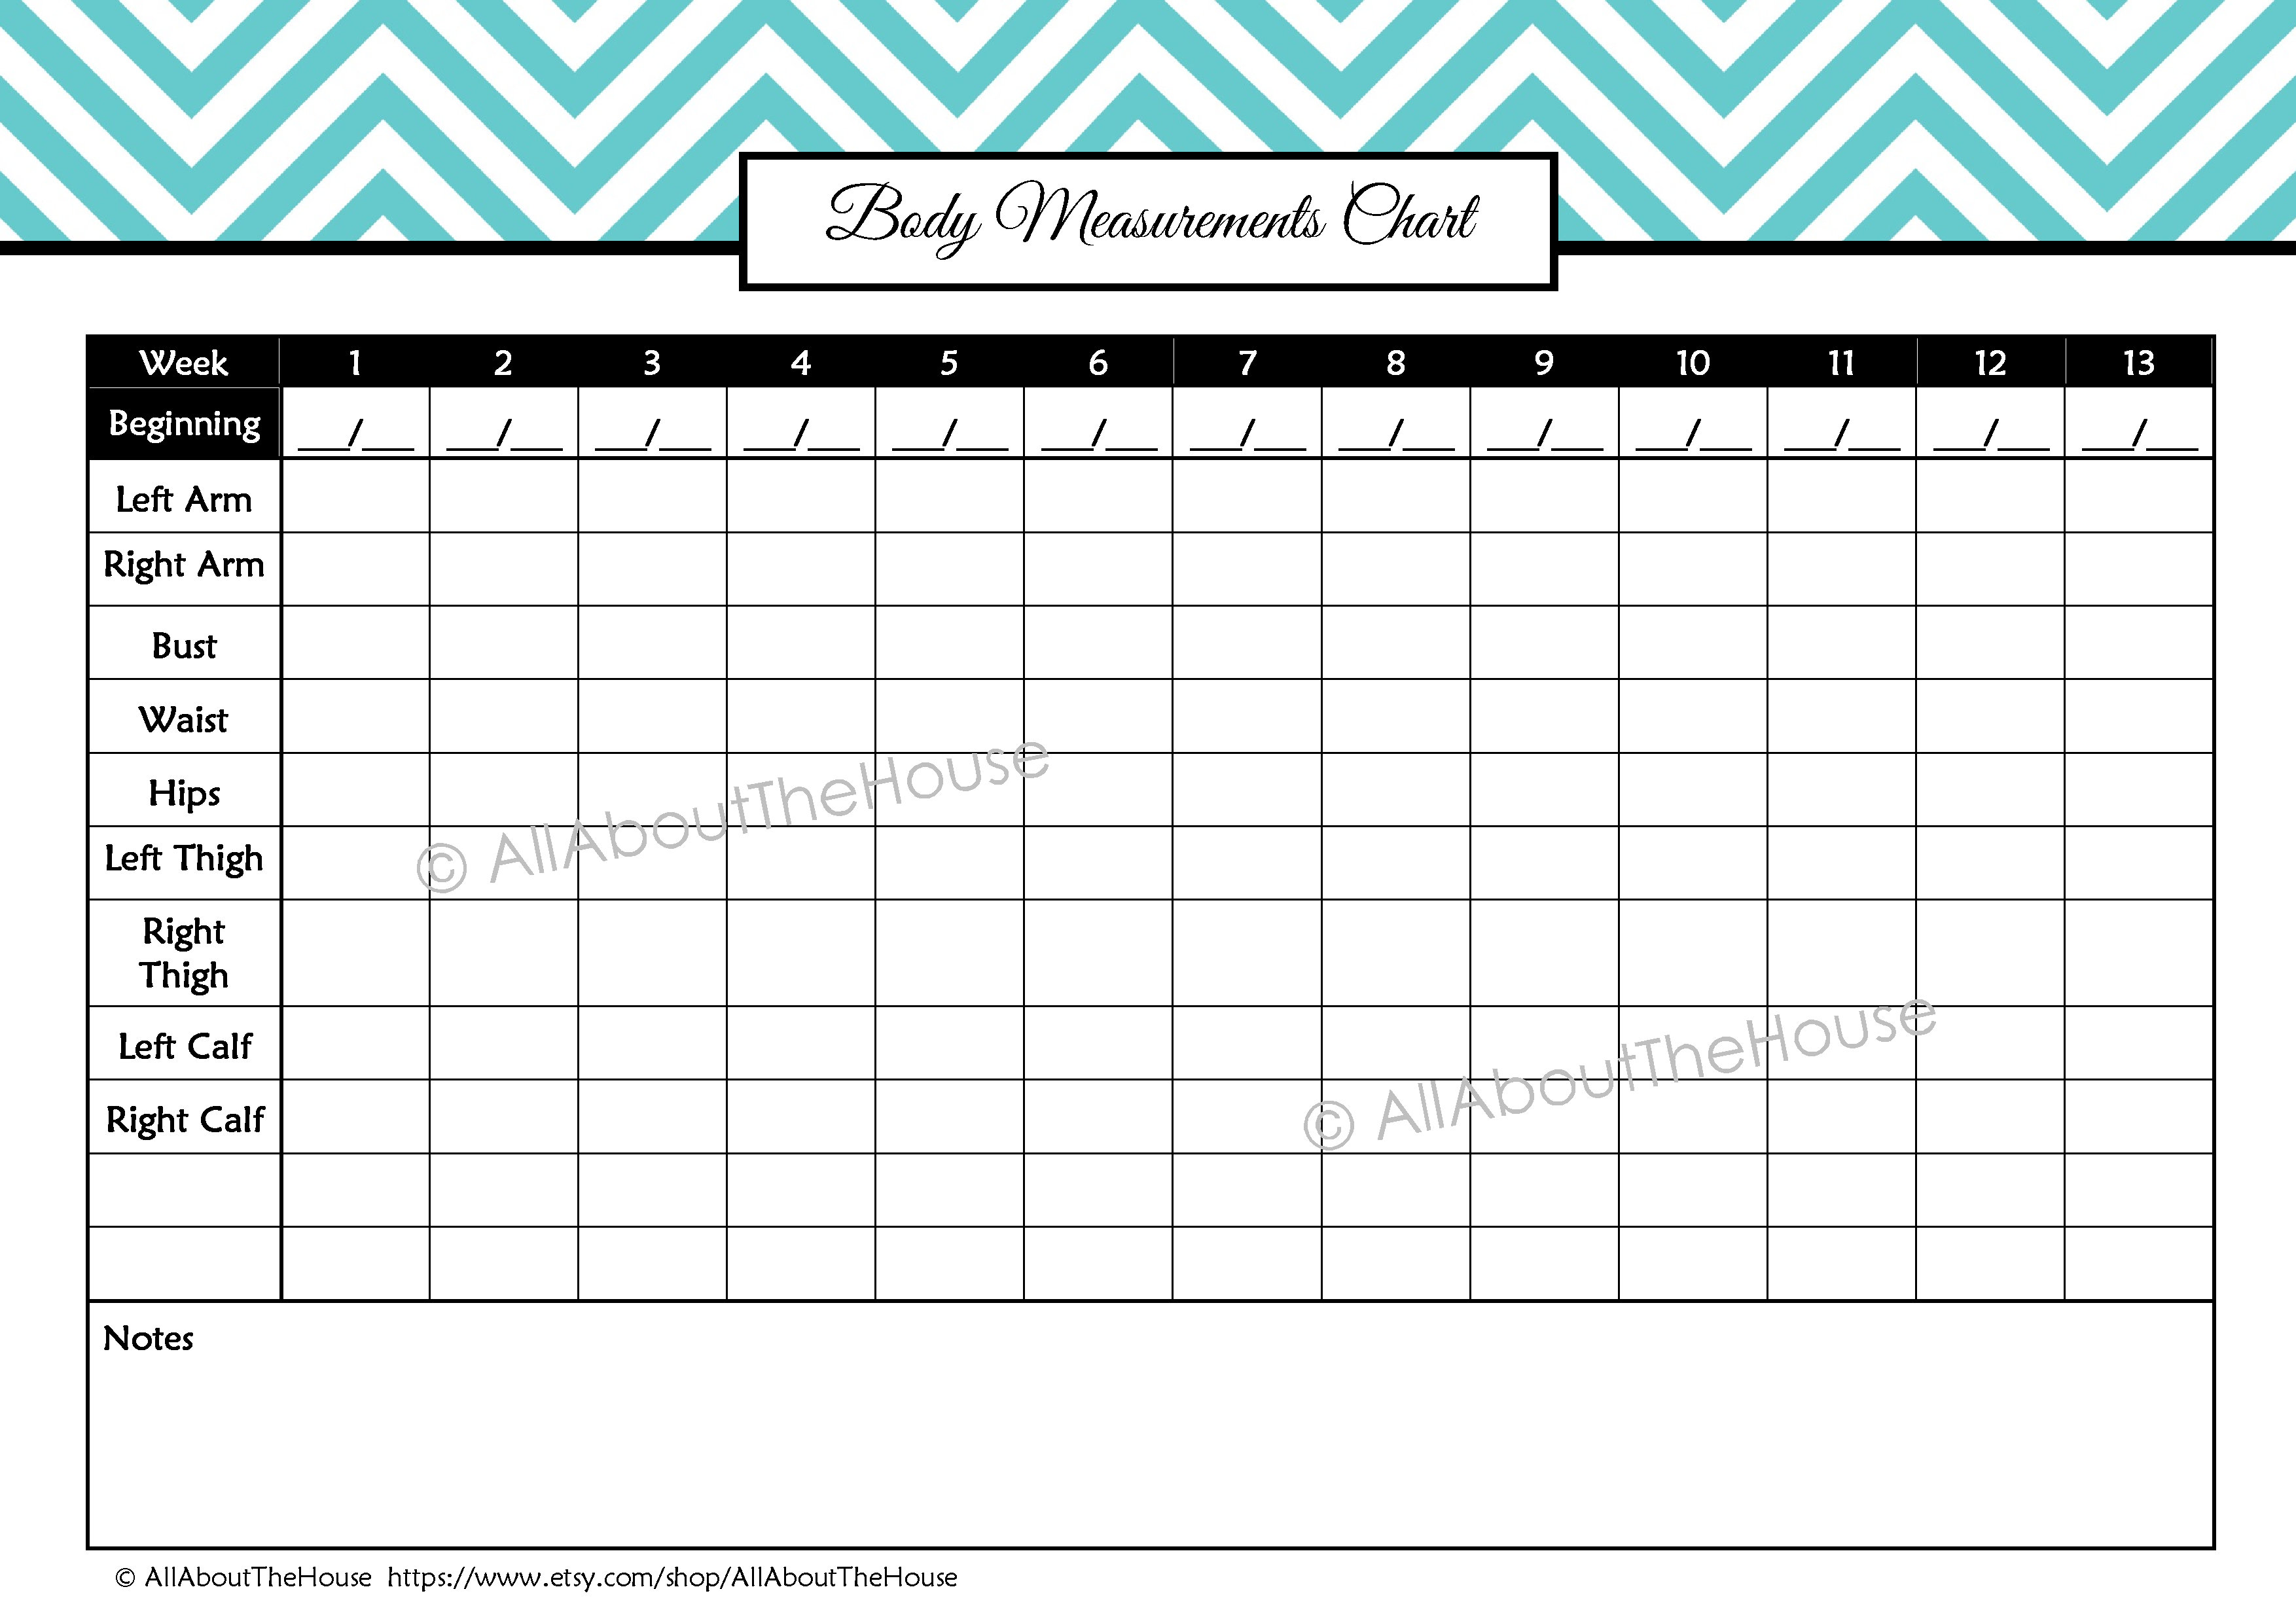 meal tracker fitness planner printable 30 day challenge tracker weight loss tracker workout log book running log measurement tracker